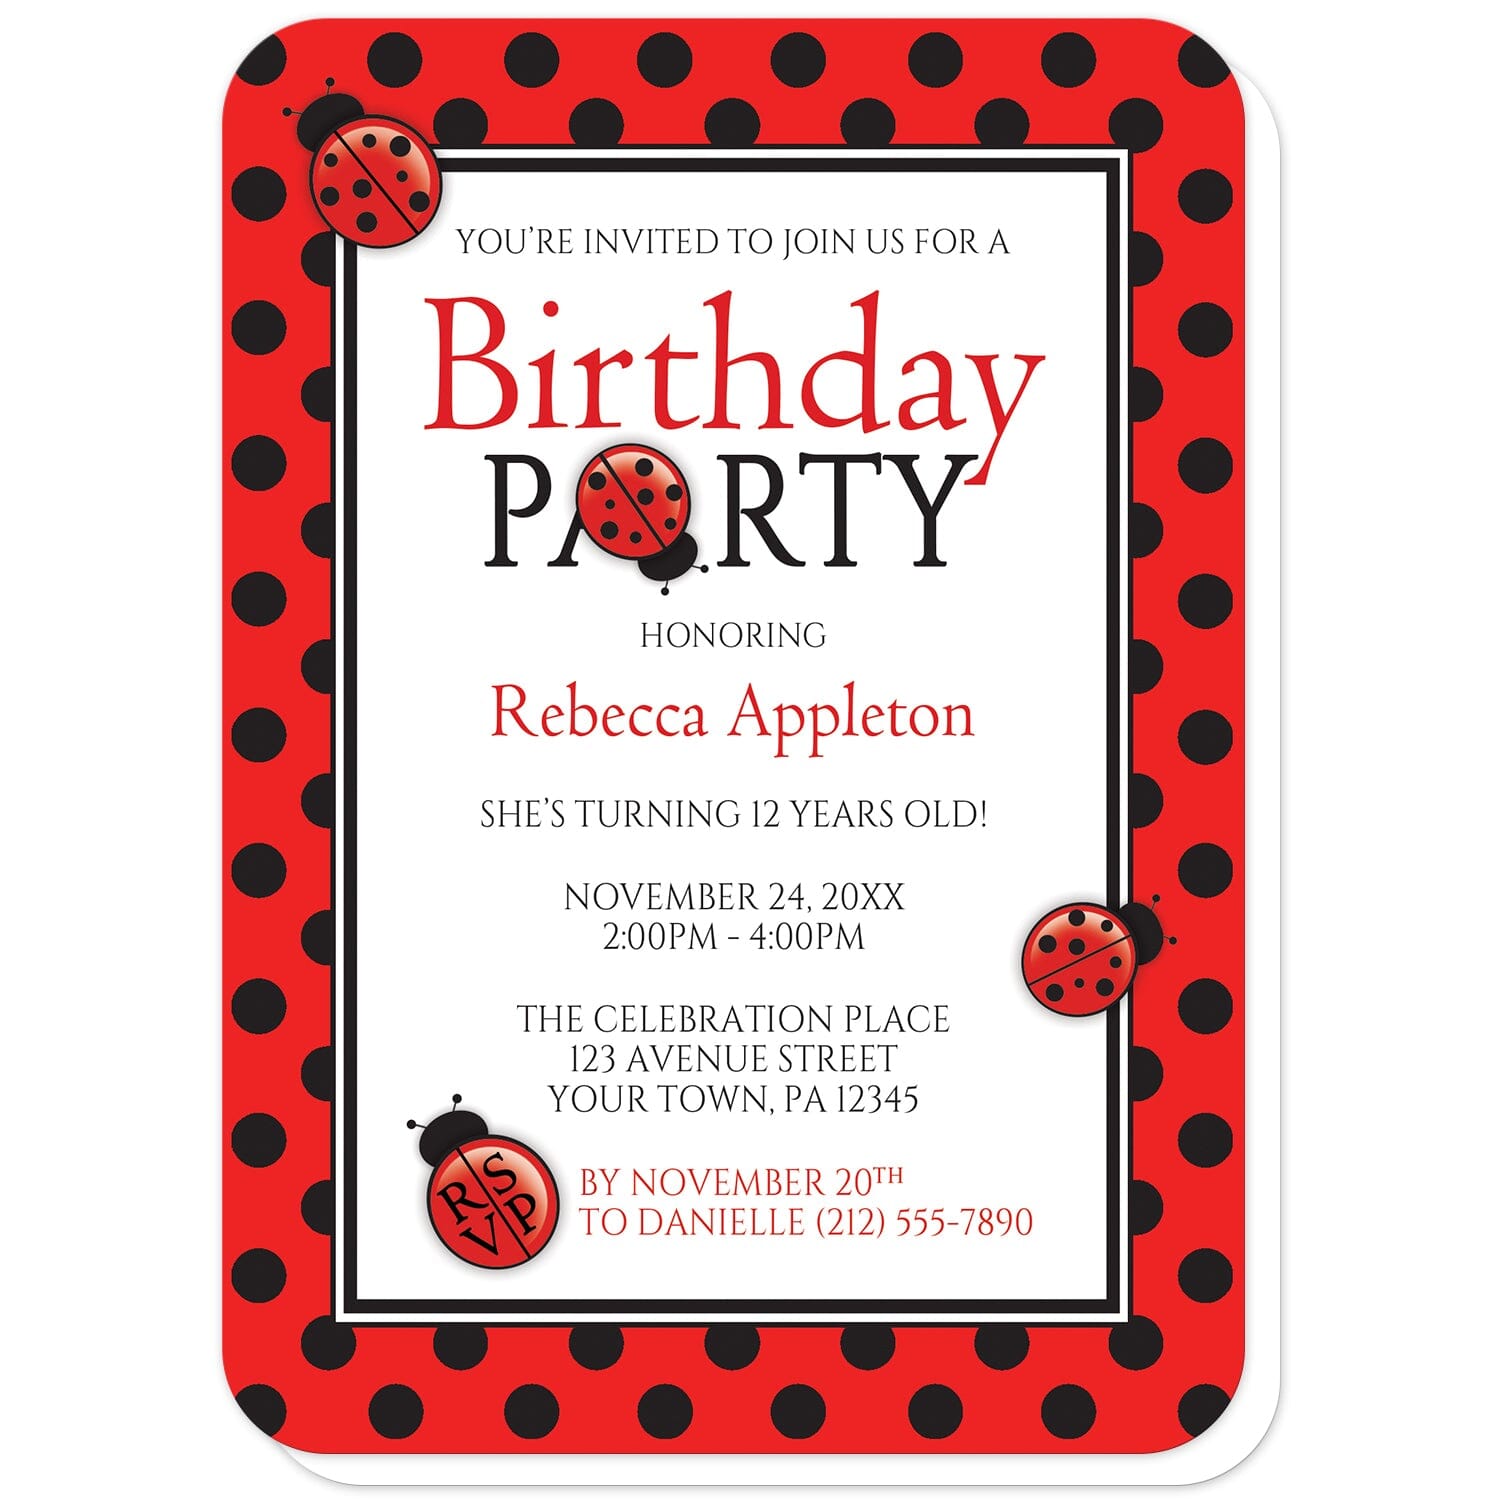 Polka Dot Red and Black Ladybug Birthday Party Invitations (with rounded corners) at Artistically Invited. Polka dot red and black ladybug birthday party invitations that are illustrated with cute ladybugs and a red and black polka dot pattern. The information you provide for your birthday party will be custom printed in red and black over white in the center. 